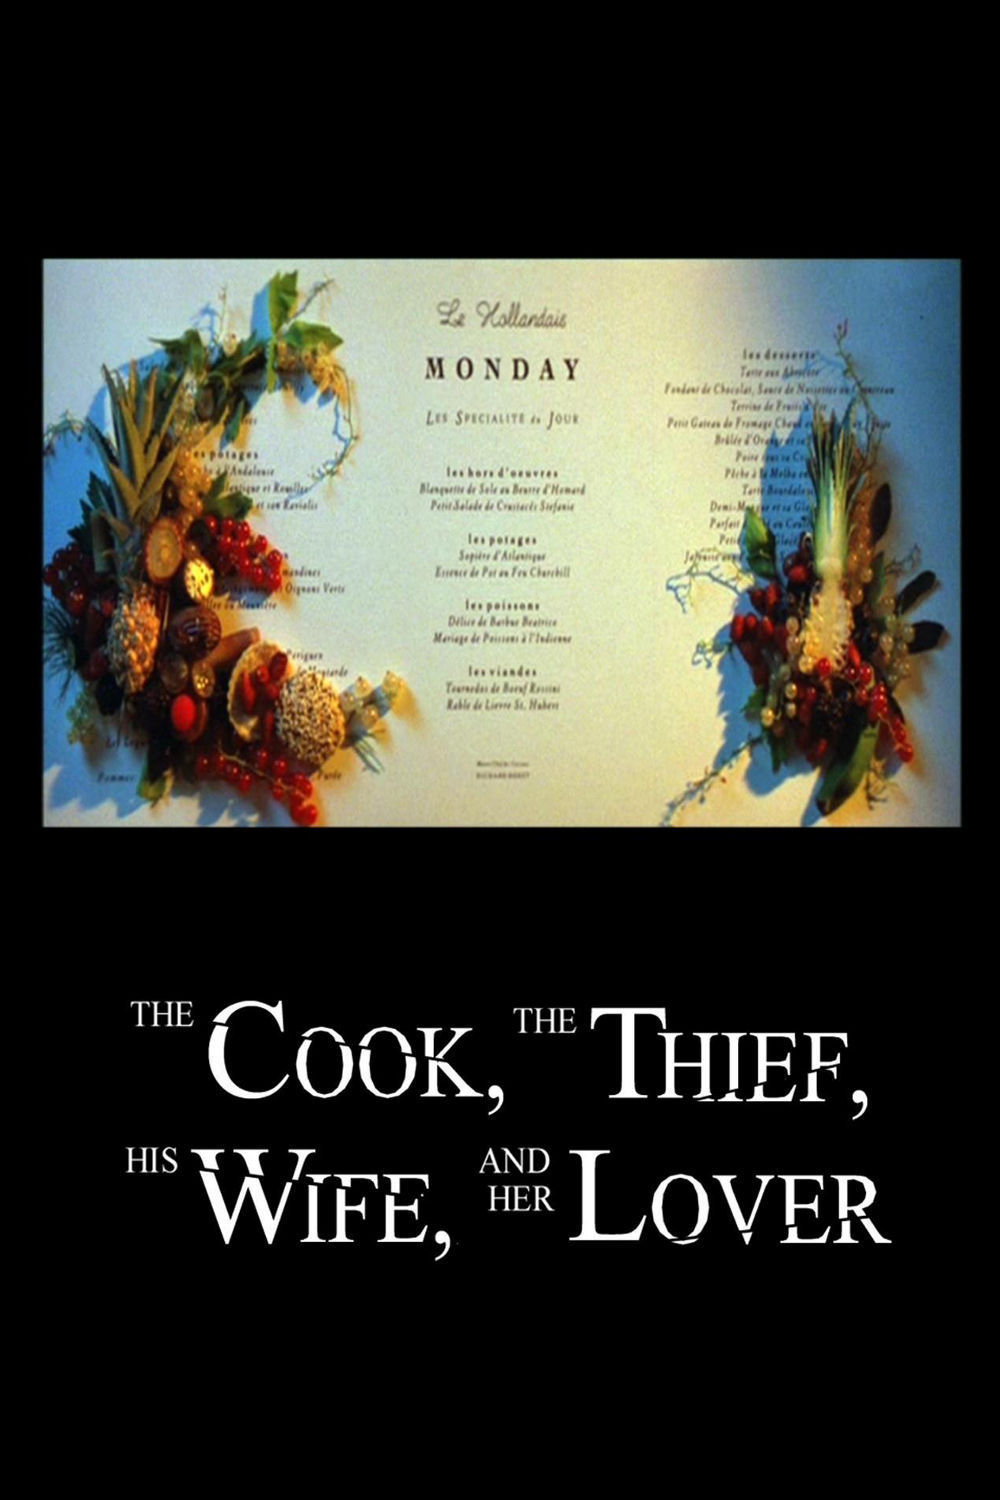 Wife thief. The Cook the Thief his wife her lover. The Cook, the Thief, his wife & her lover (1989) Peter Greenaway.